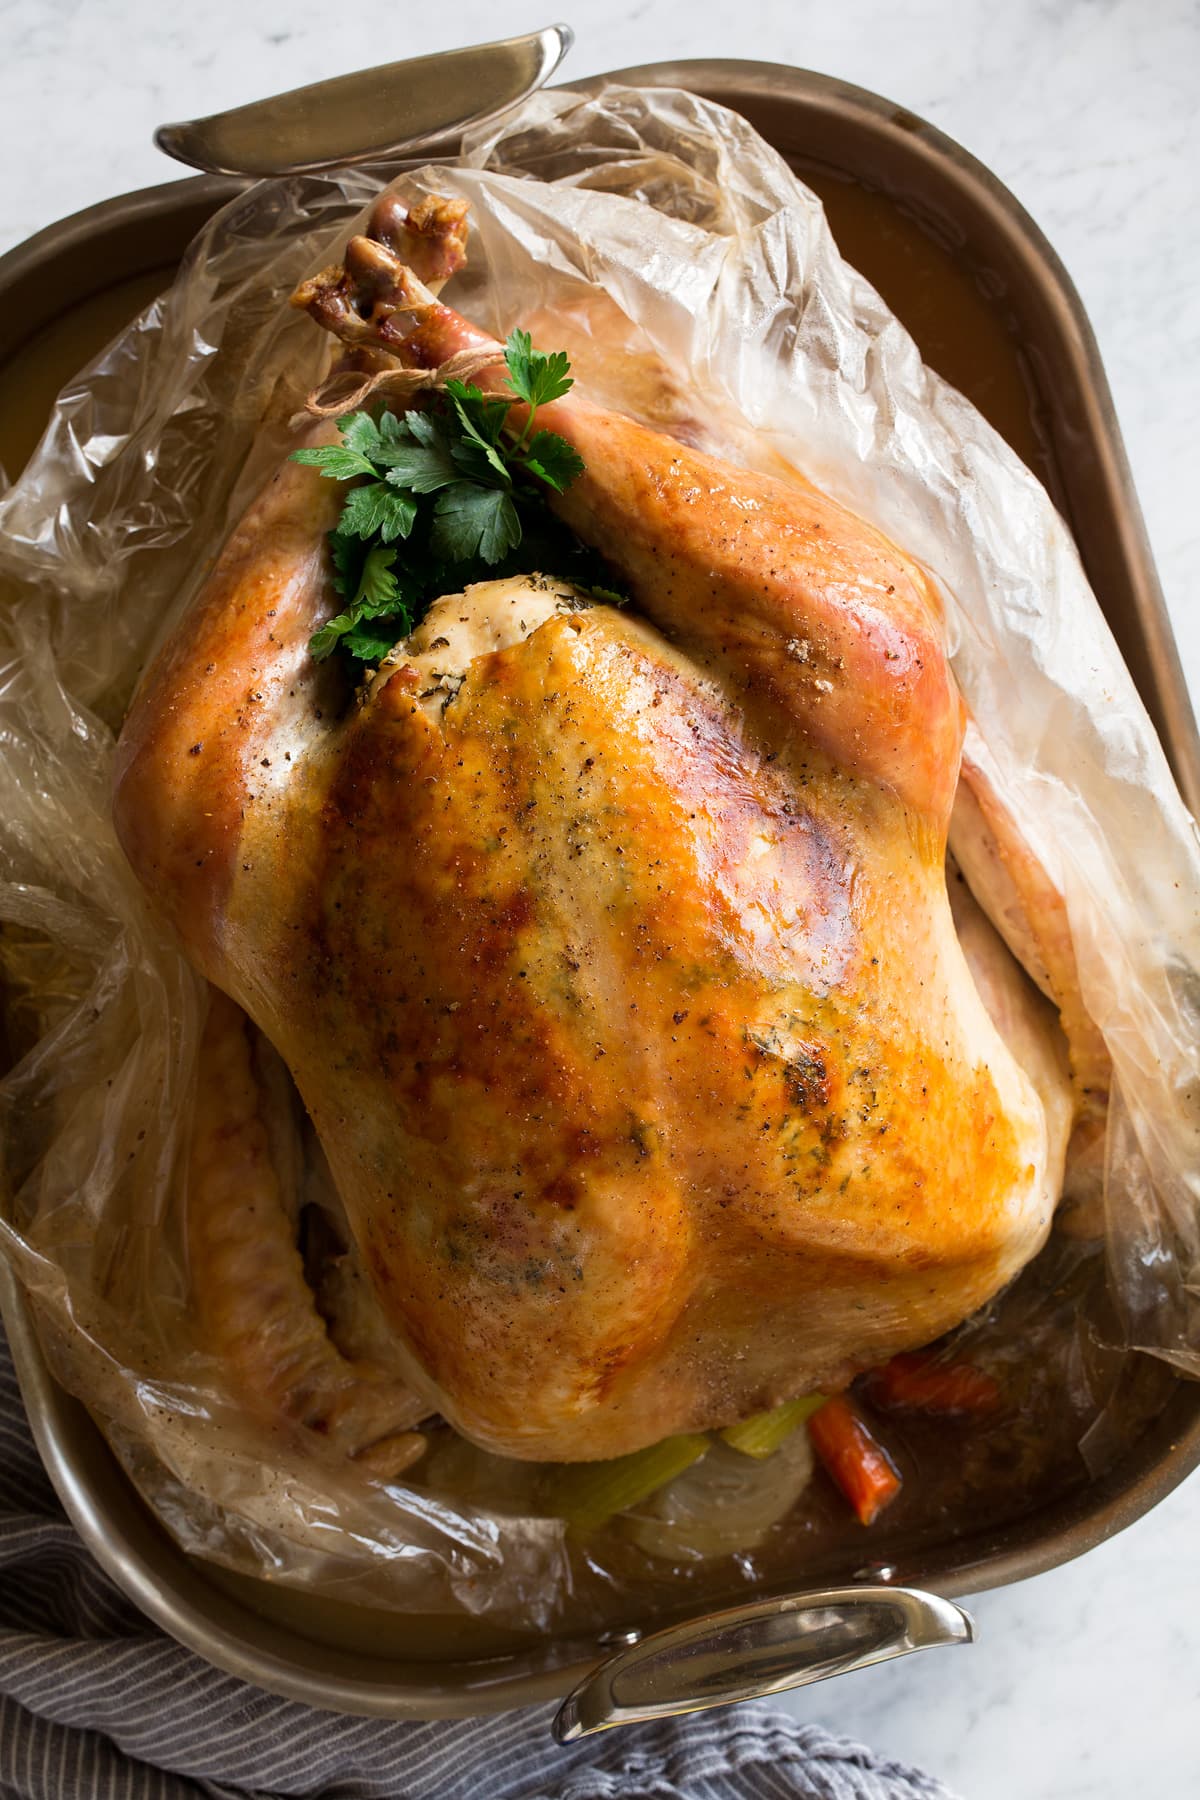 Overhead image of large turkey with golden brown skin, sitting in an oven bag in a large roasting pan.